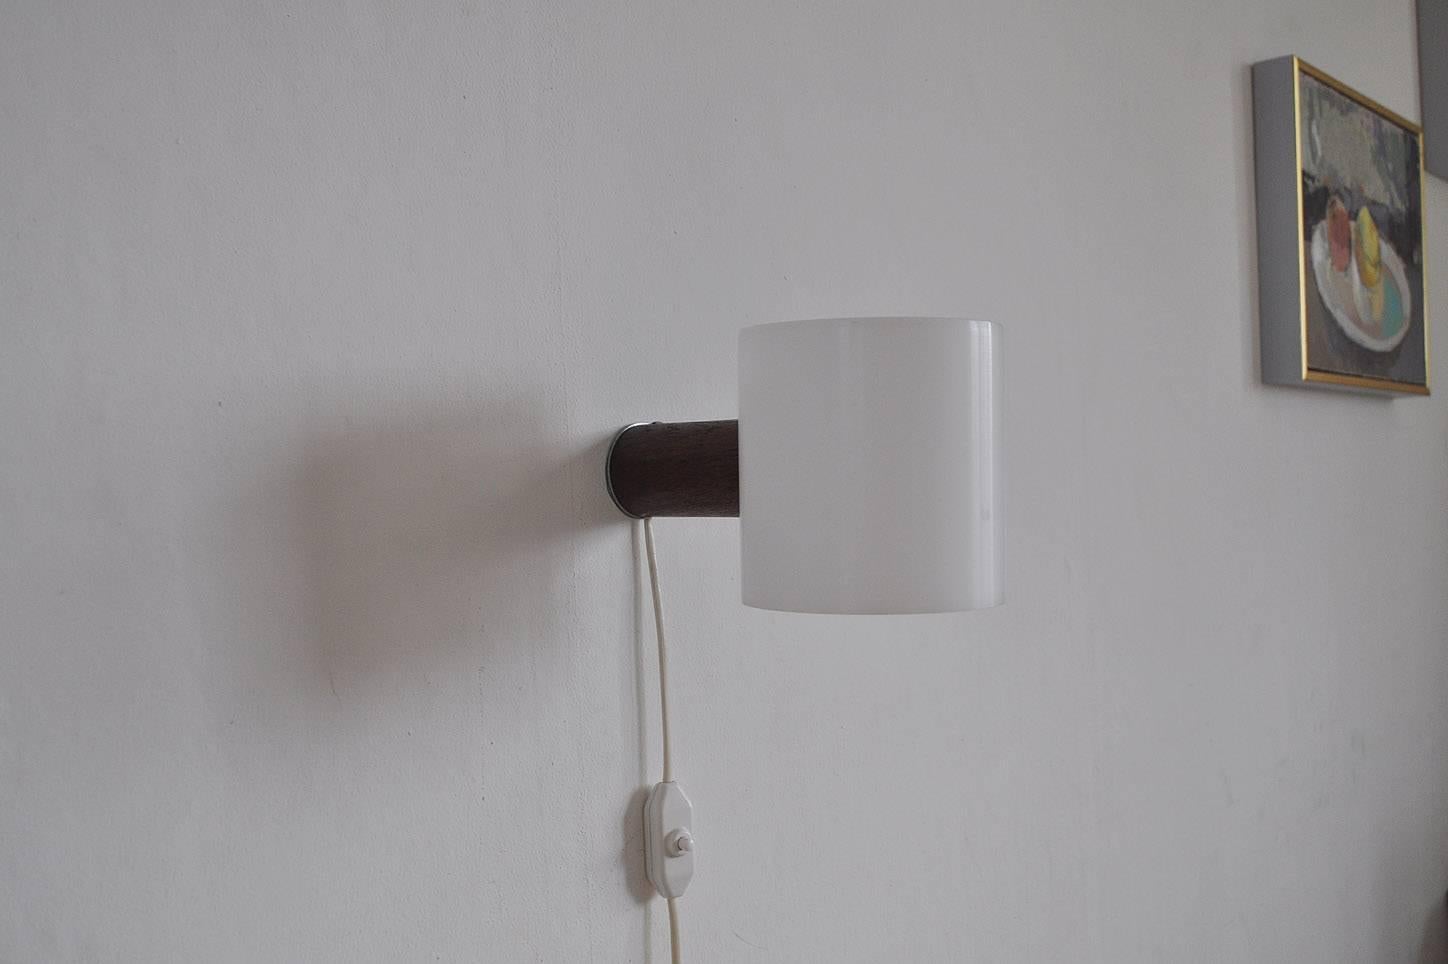 Swedish teak and acrylate wall lamp designed by Uno & Östen Kristiansson and manufactured by Luxus, Sweden.

Measures: Diameter of lampshade: 12 cm 
Height: 12.5 cm
Depth: 21 cm.